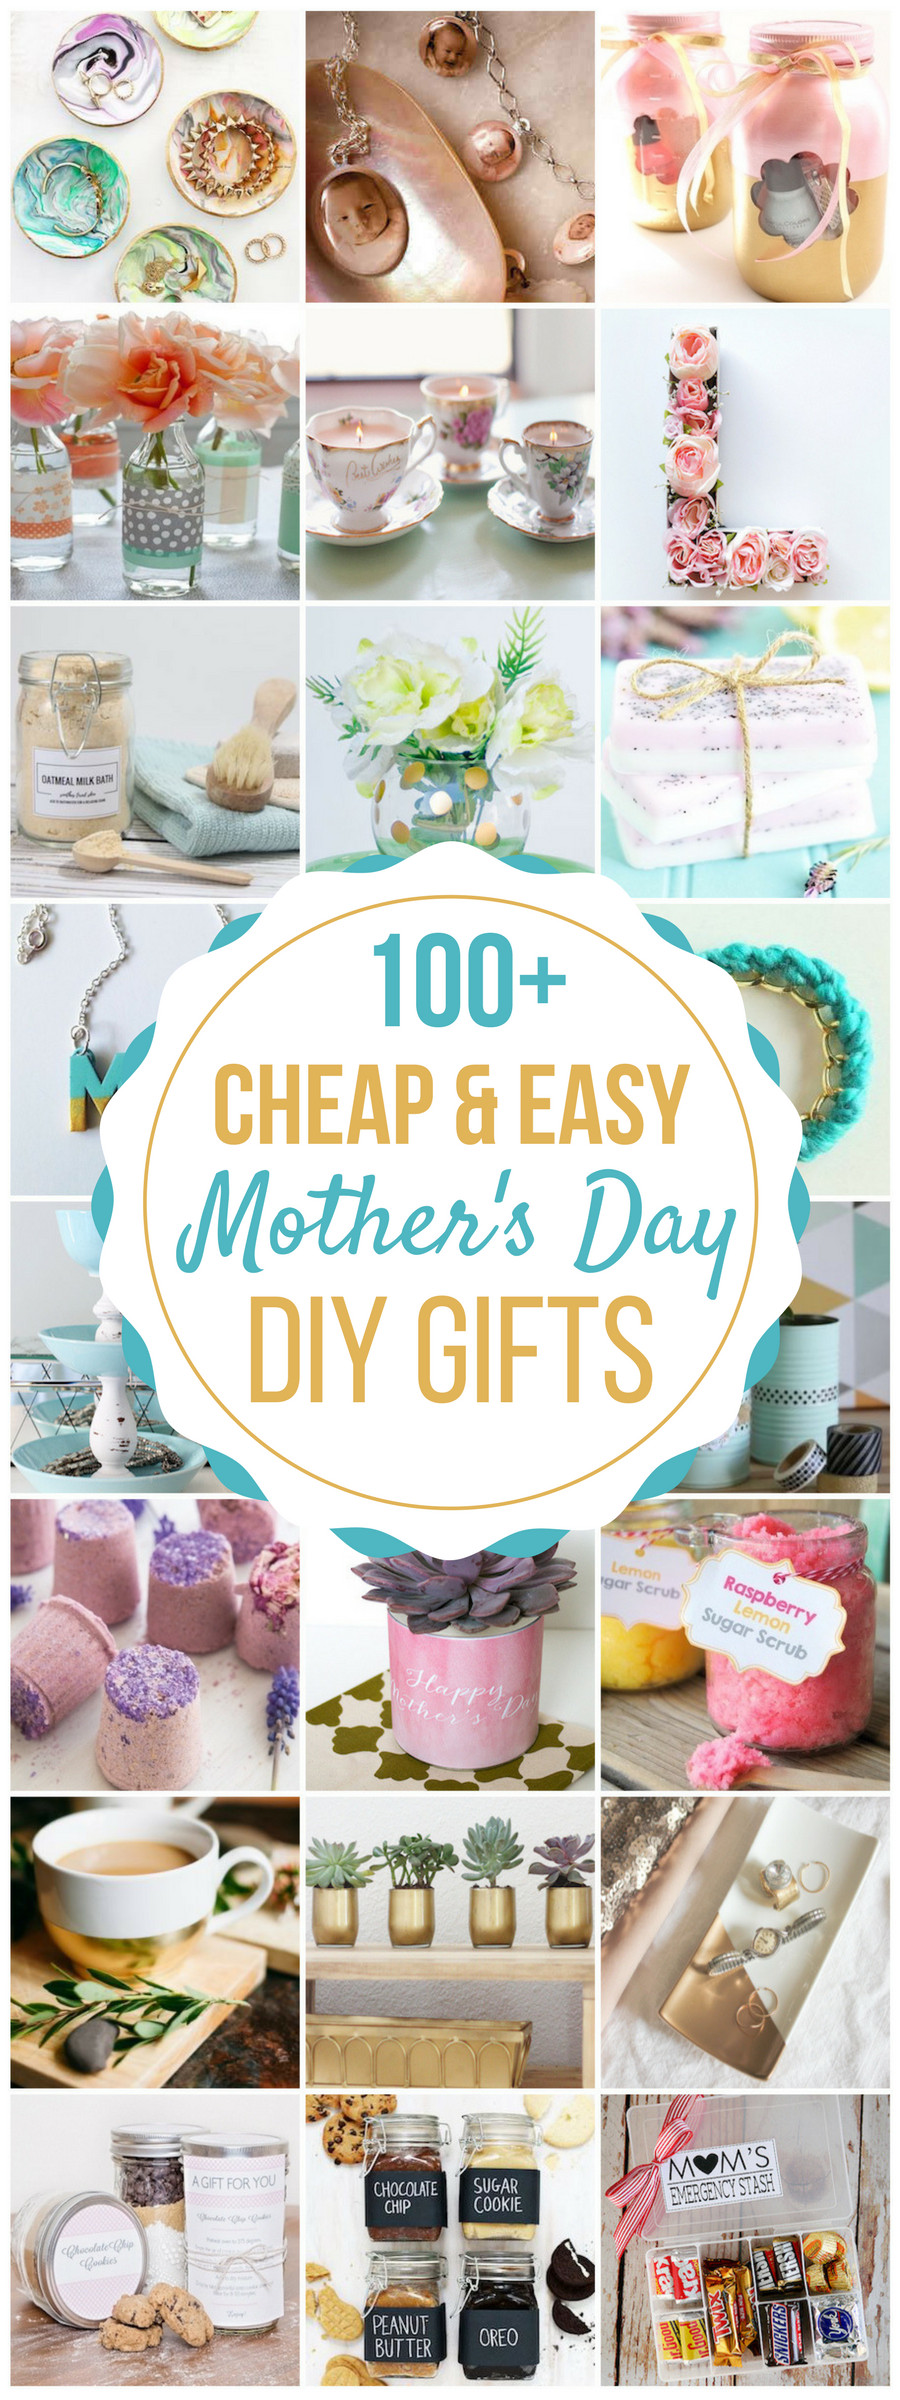 Mothers Day Gift Ideas DIY
 100 Cheap & Easy DIY Mother s Day Gifts Prudent Penny